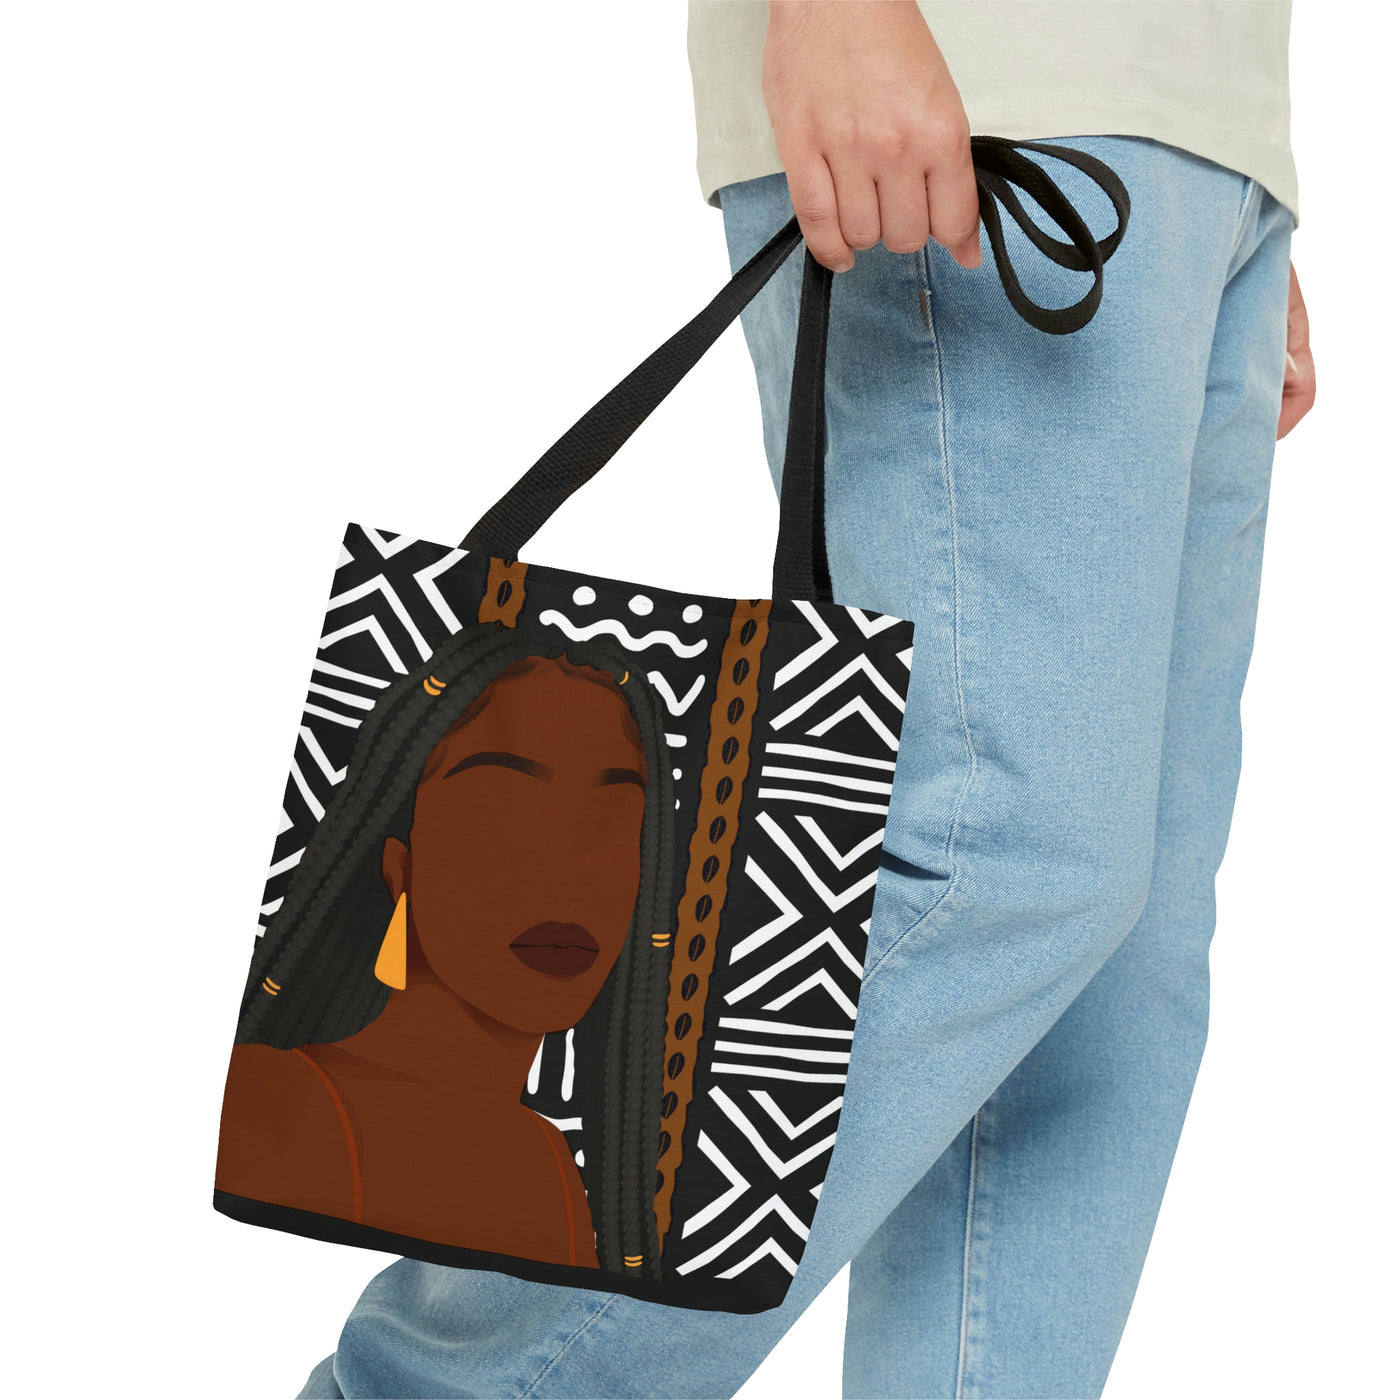 Afro Braided Woman Large Tote Bag